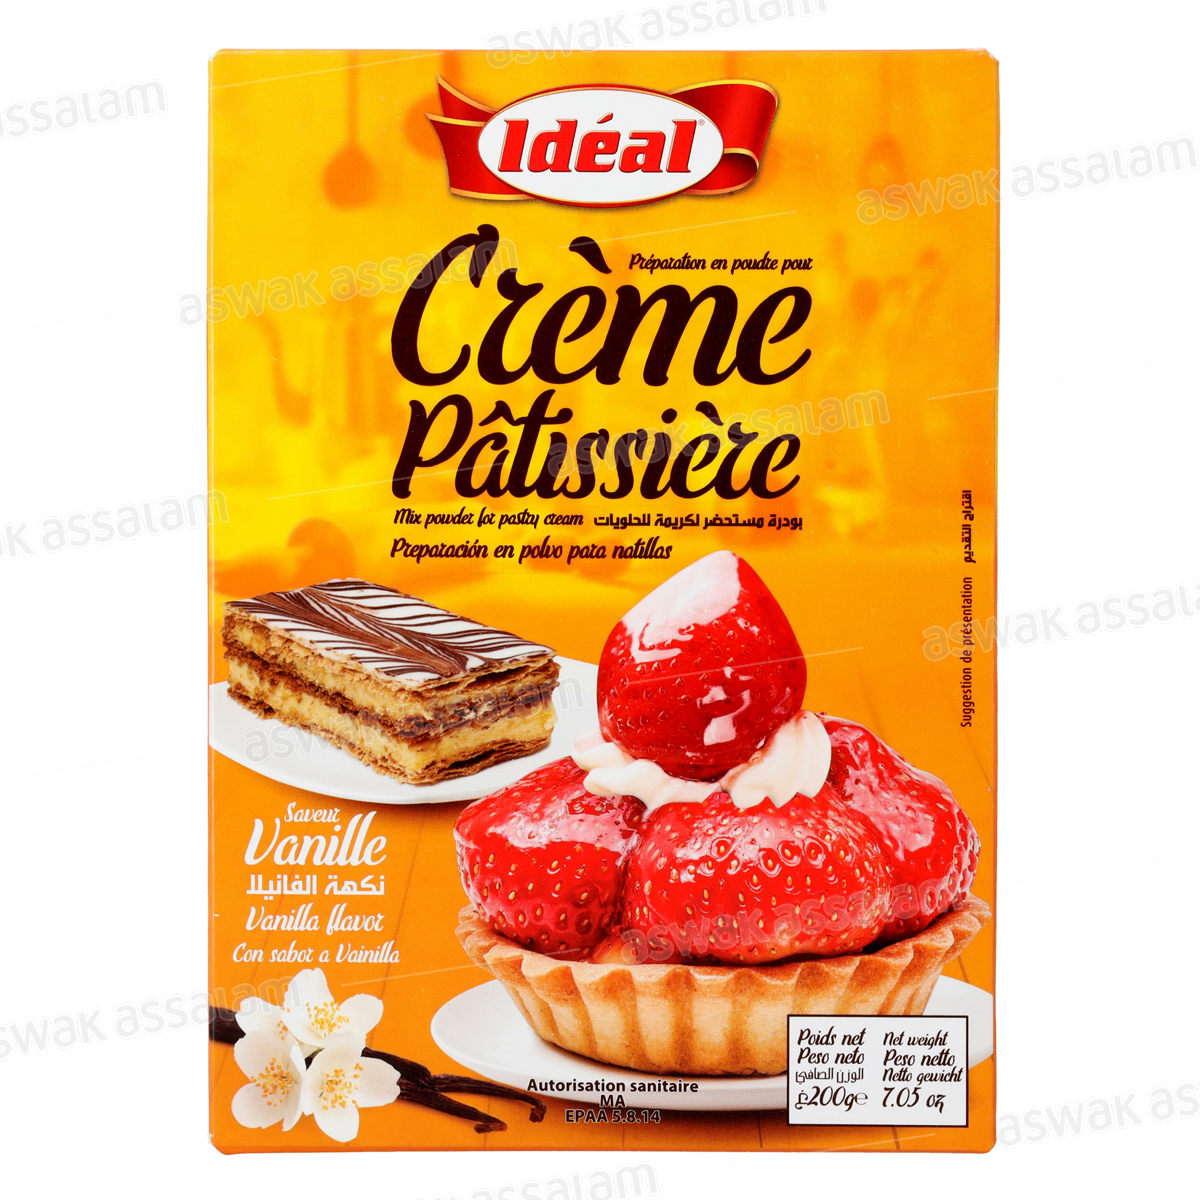 CREME PATISSIERE 200G IDEAL - Aswak Drive - AS from Aswak